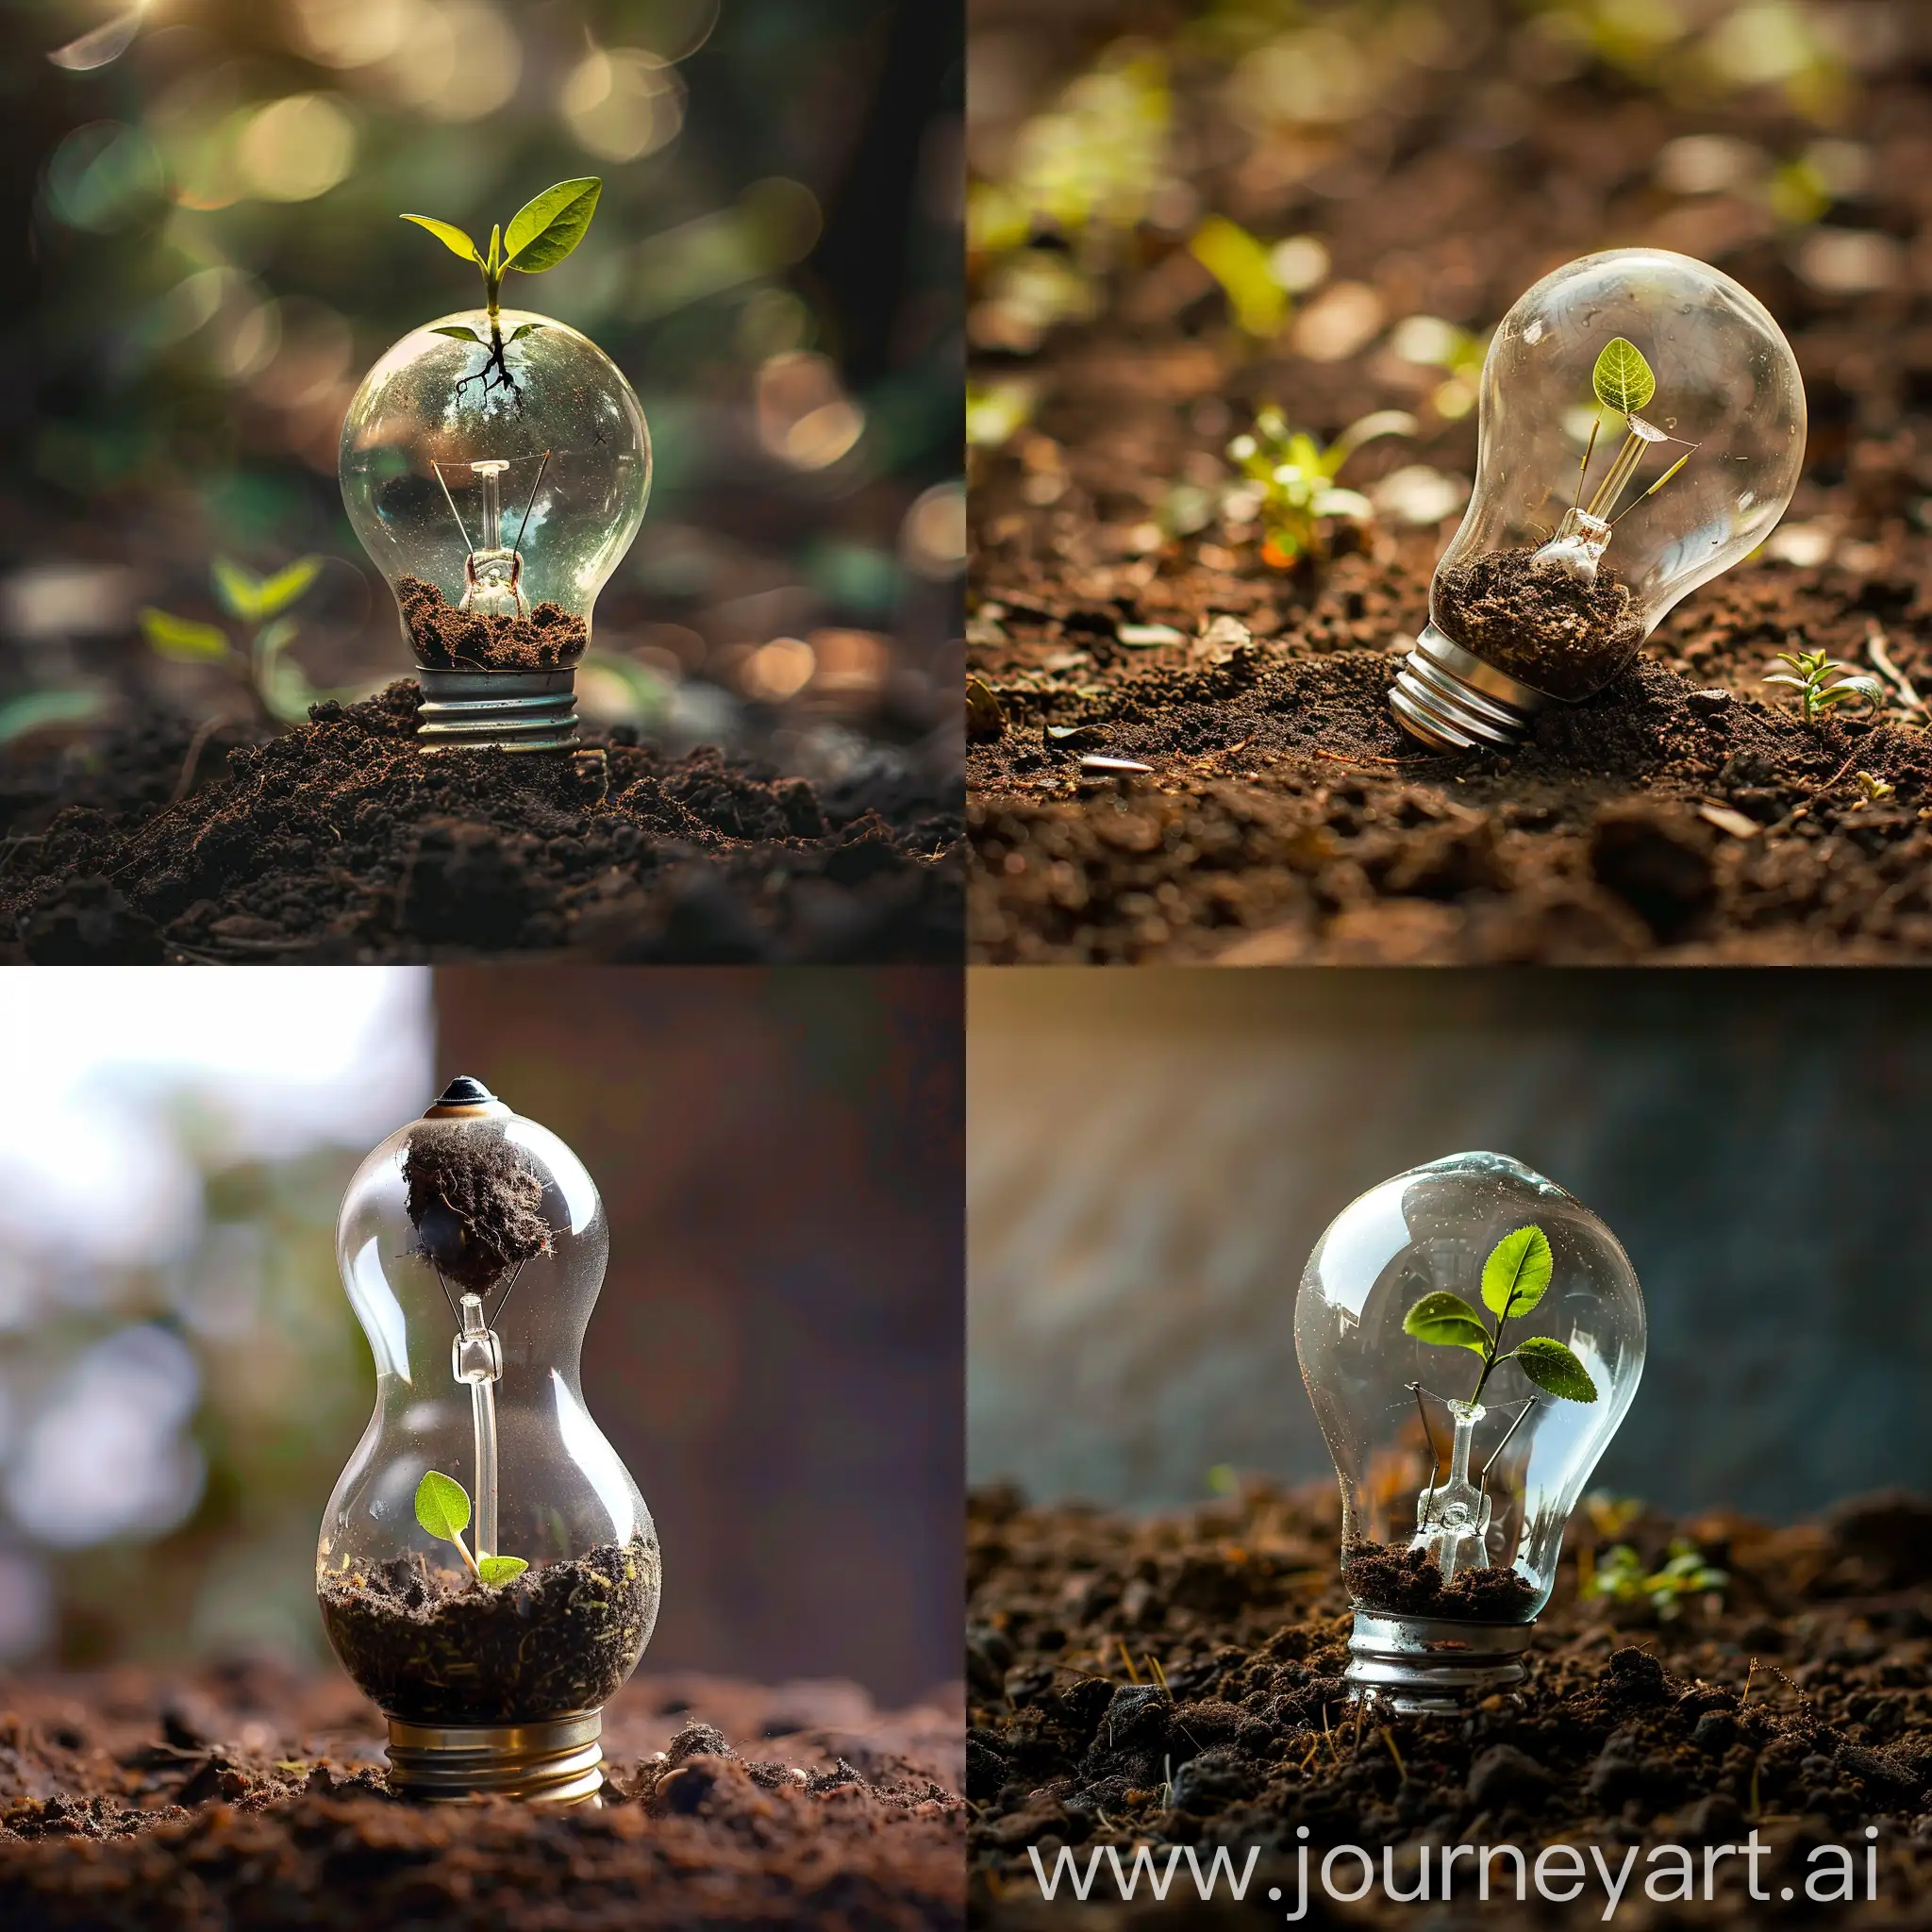 Sustainable-Energy-Concept-Sprouting-Plant-Inside-Bulb-on-Soil